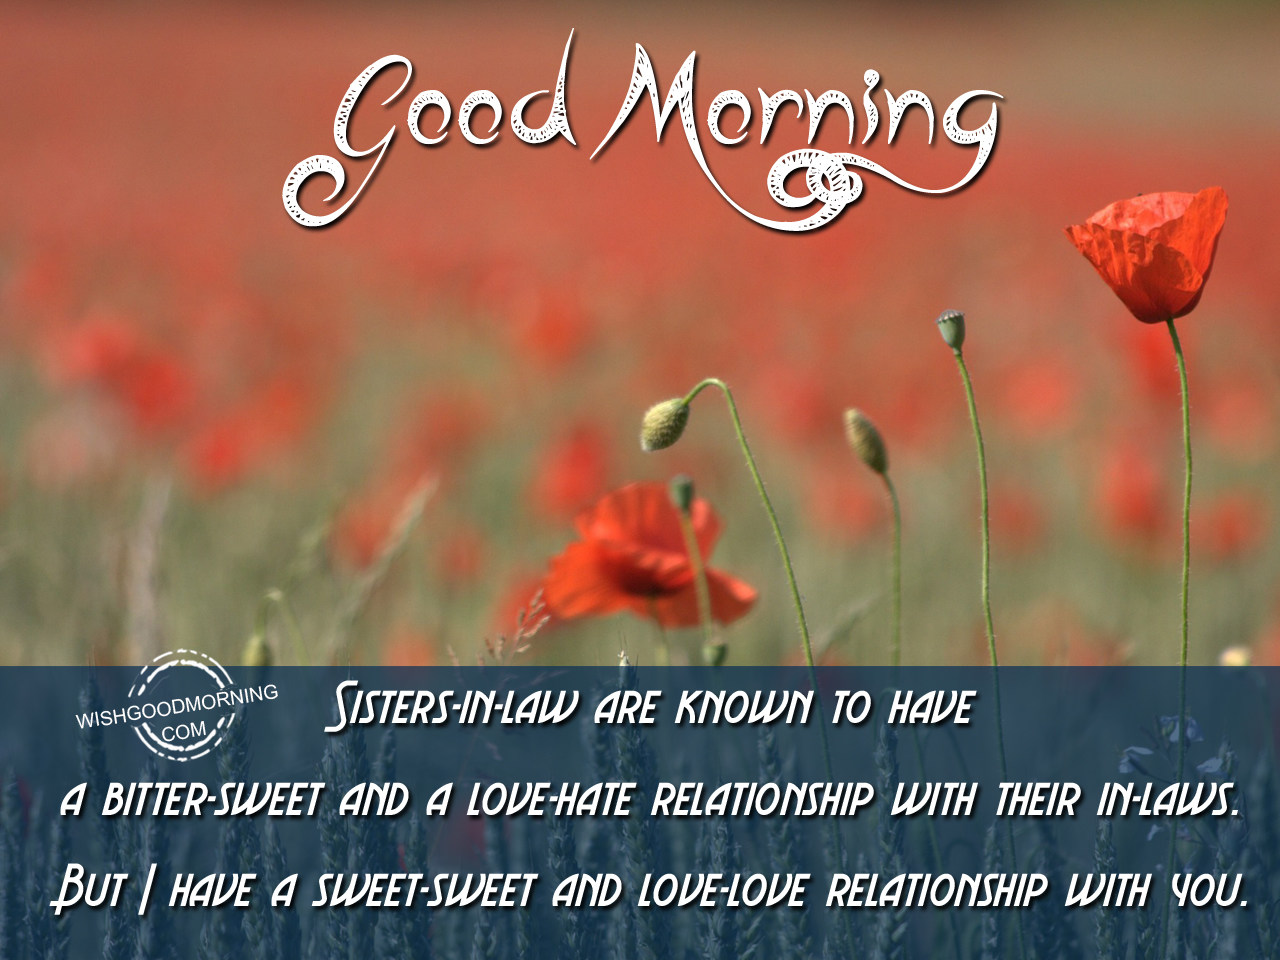 a href="https://www.wishgoodmorning.com/good-morning-wishes-for-sister-in-law/a-sweet...